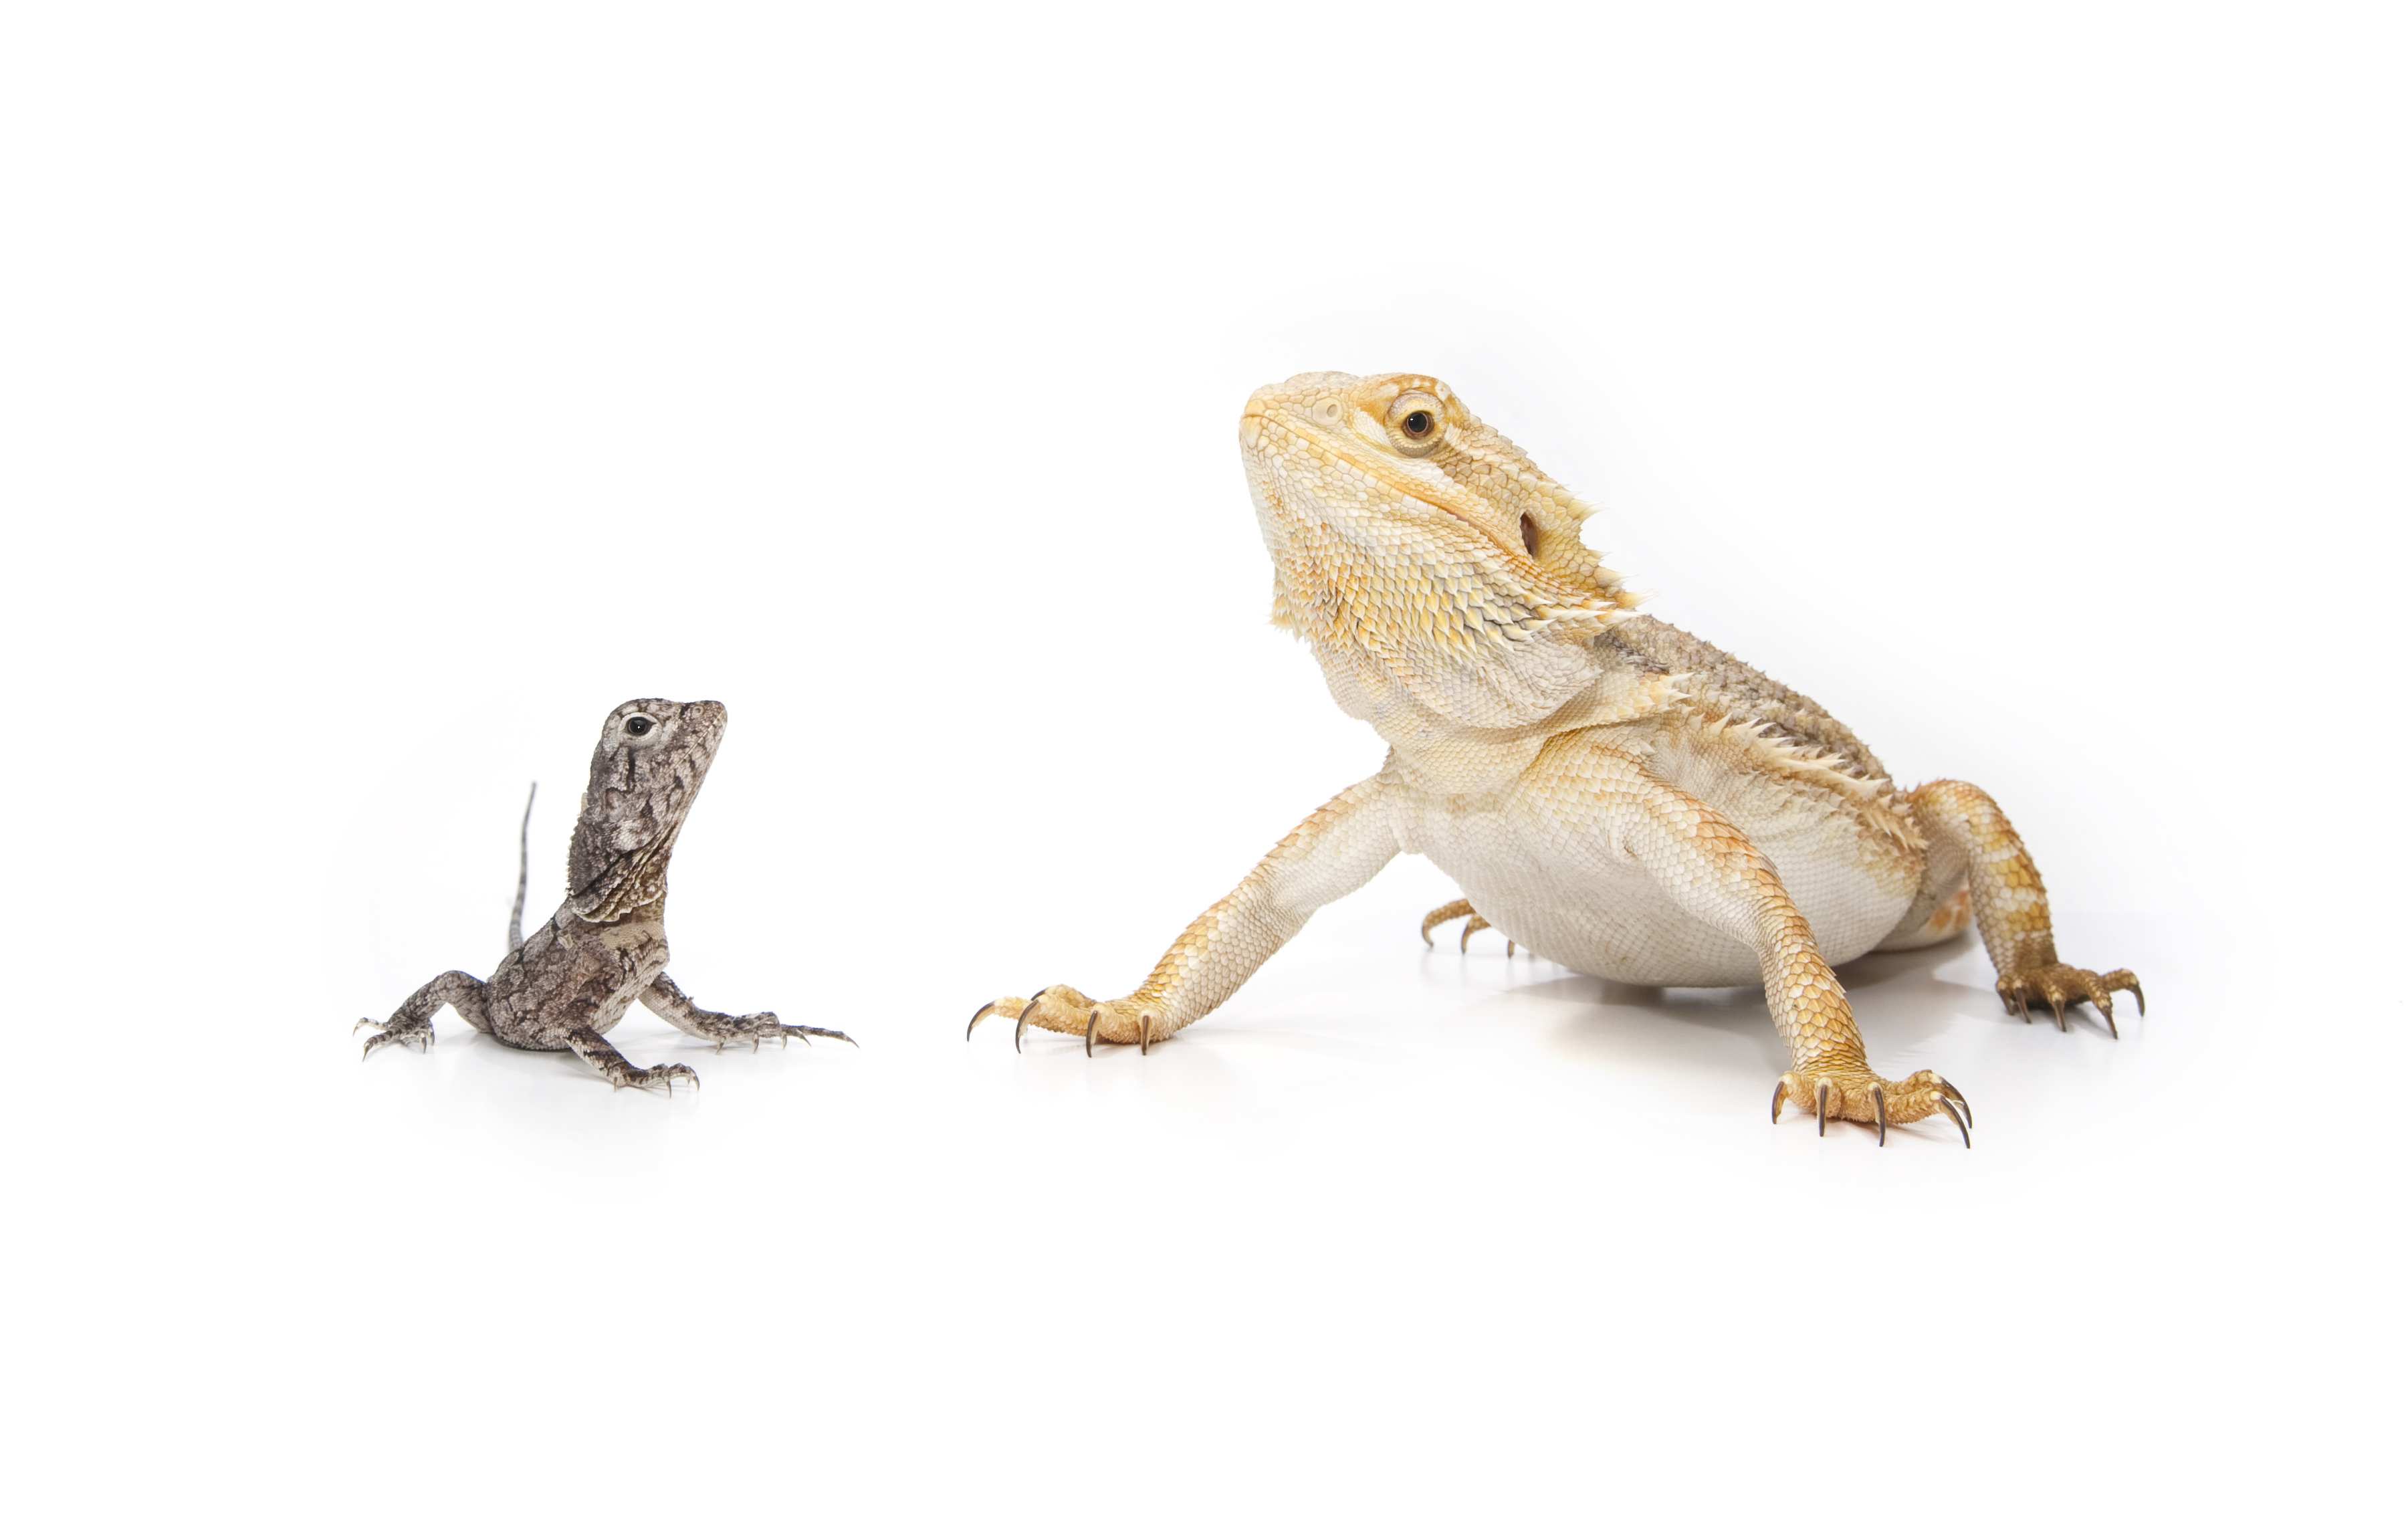 White on the arms and tail? : r/BeardedDragons